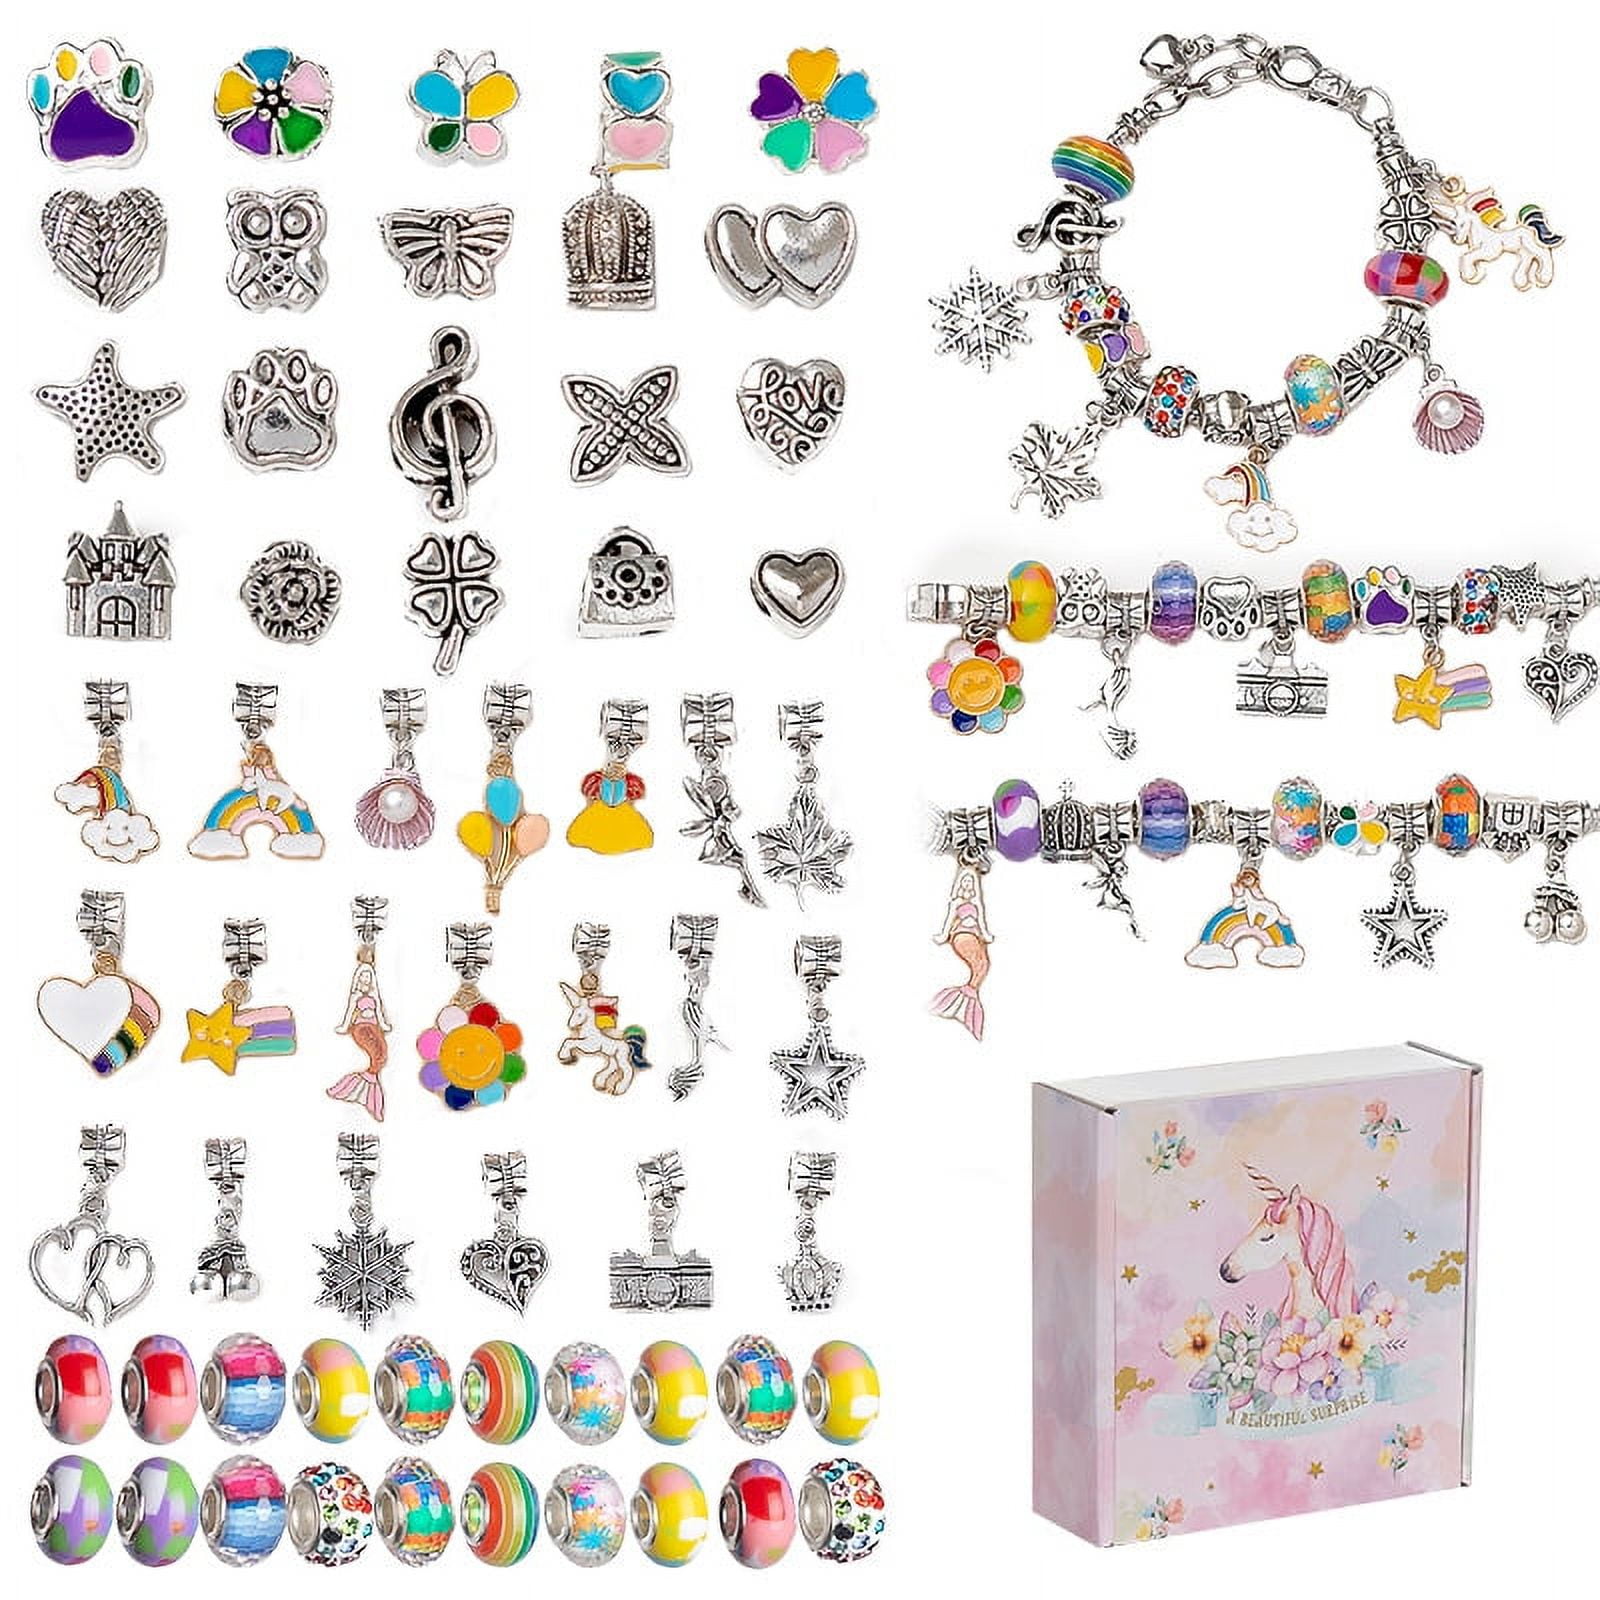 150 PCS Large Charm Bracelet Making Kit Beads for Jewelry Making Unicorn  Mermaid DIY Arts Supplies and Crafts for Girls Ages 8-12 Kids Birthday and  Christmas Gifts for Teenage Girls